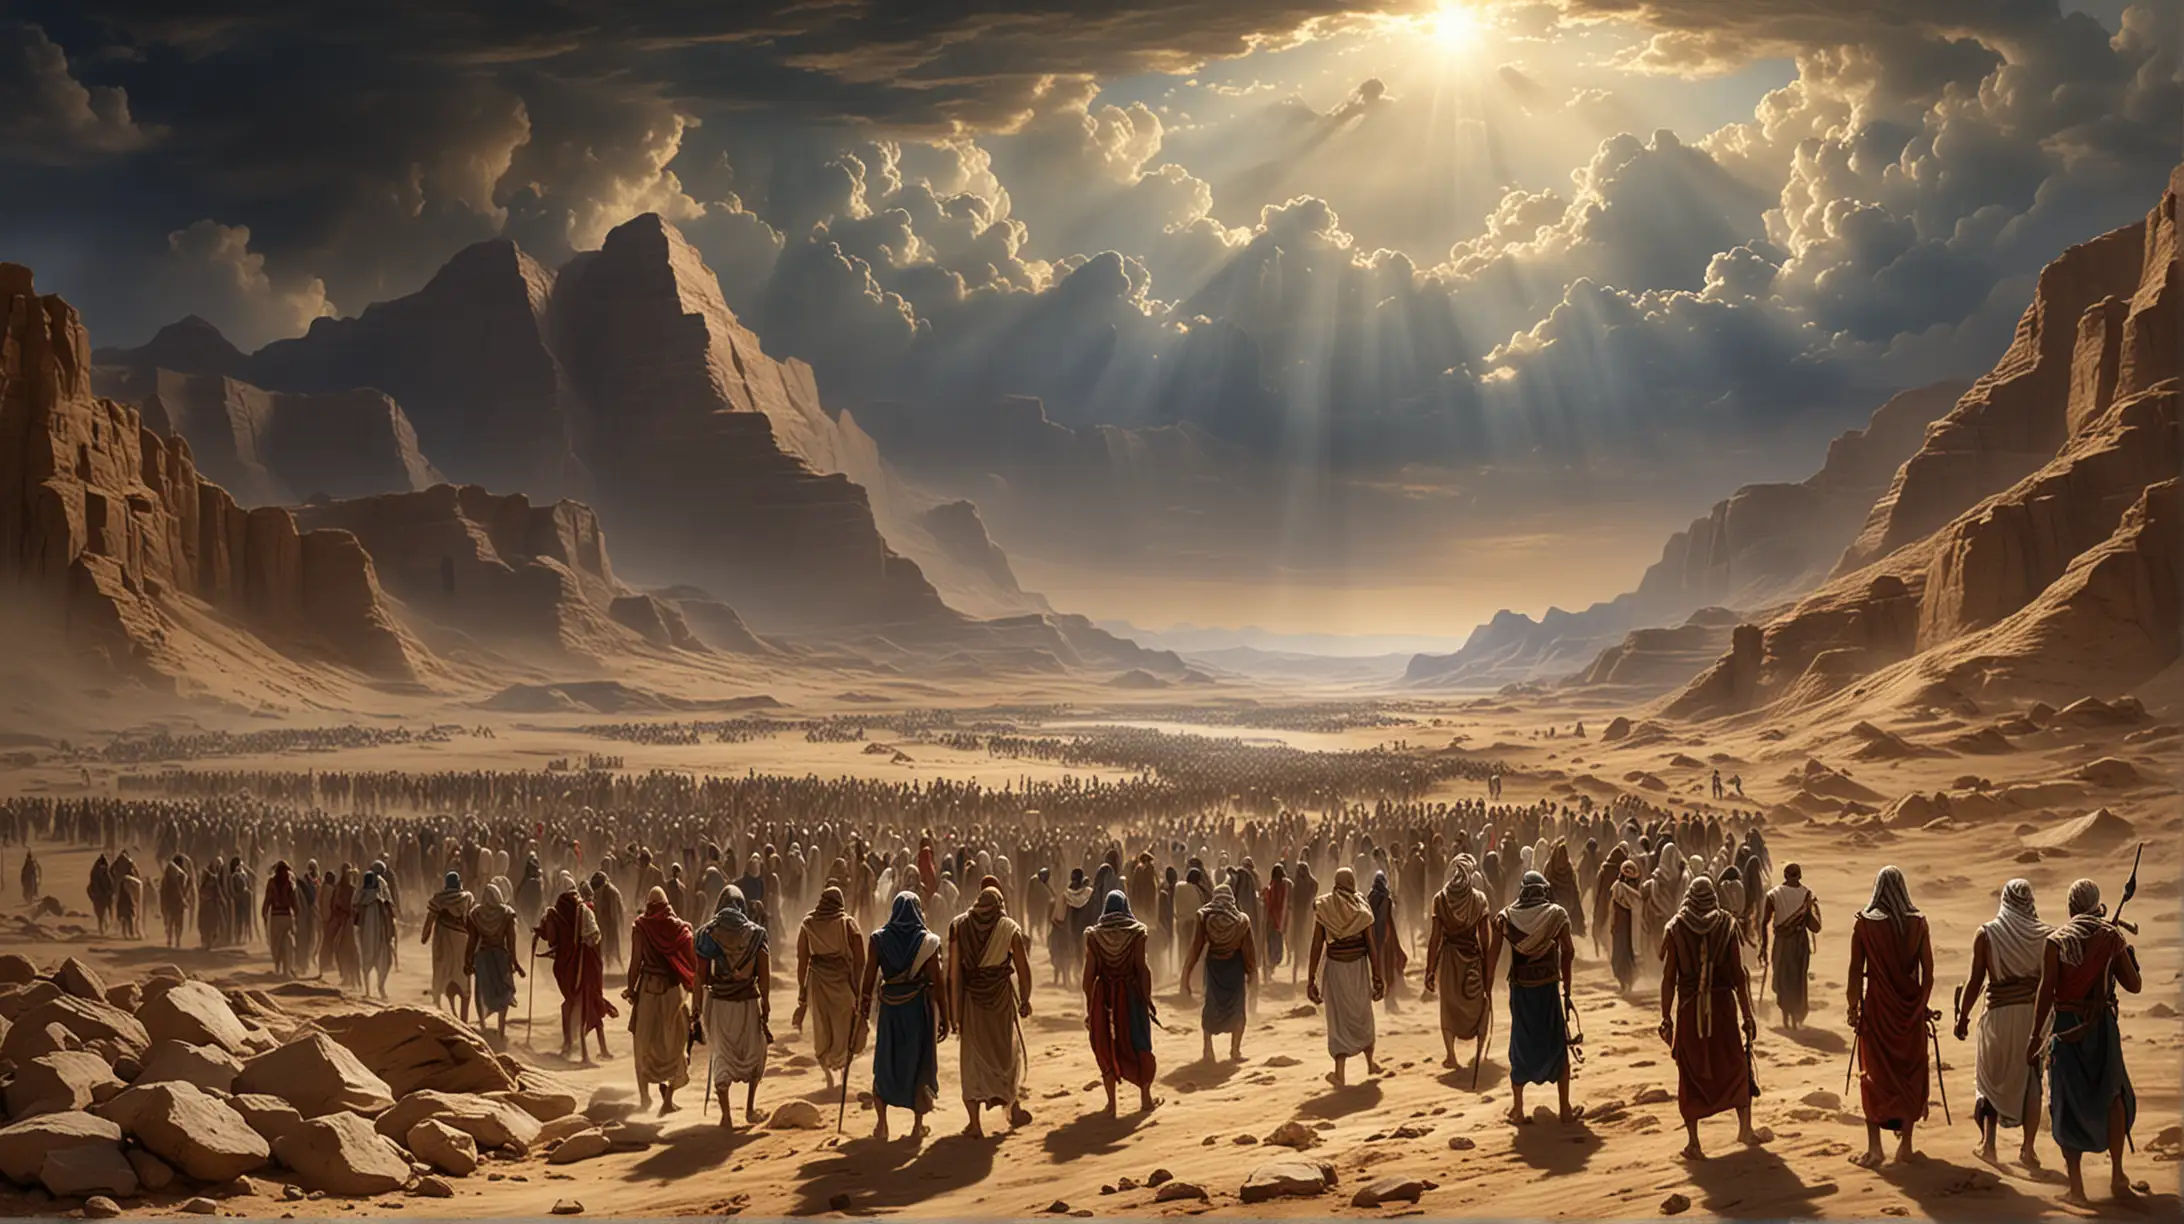 Oppressed People in Desert with Foreboding Sky Biblical Era Imagery